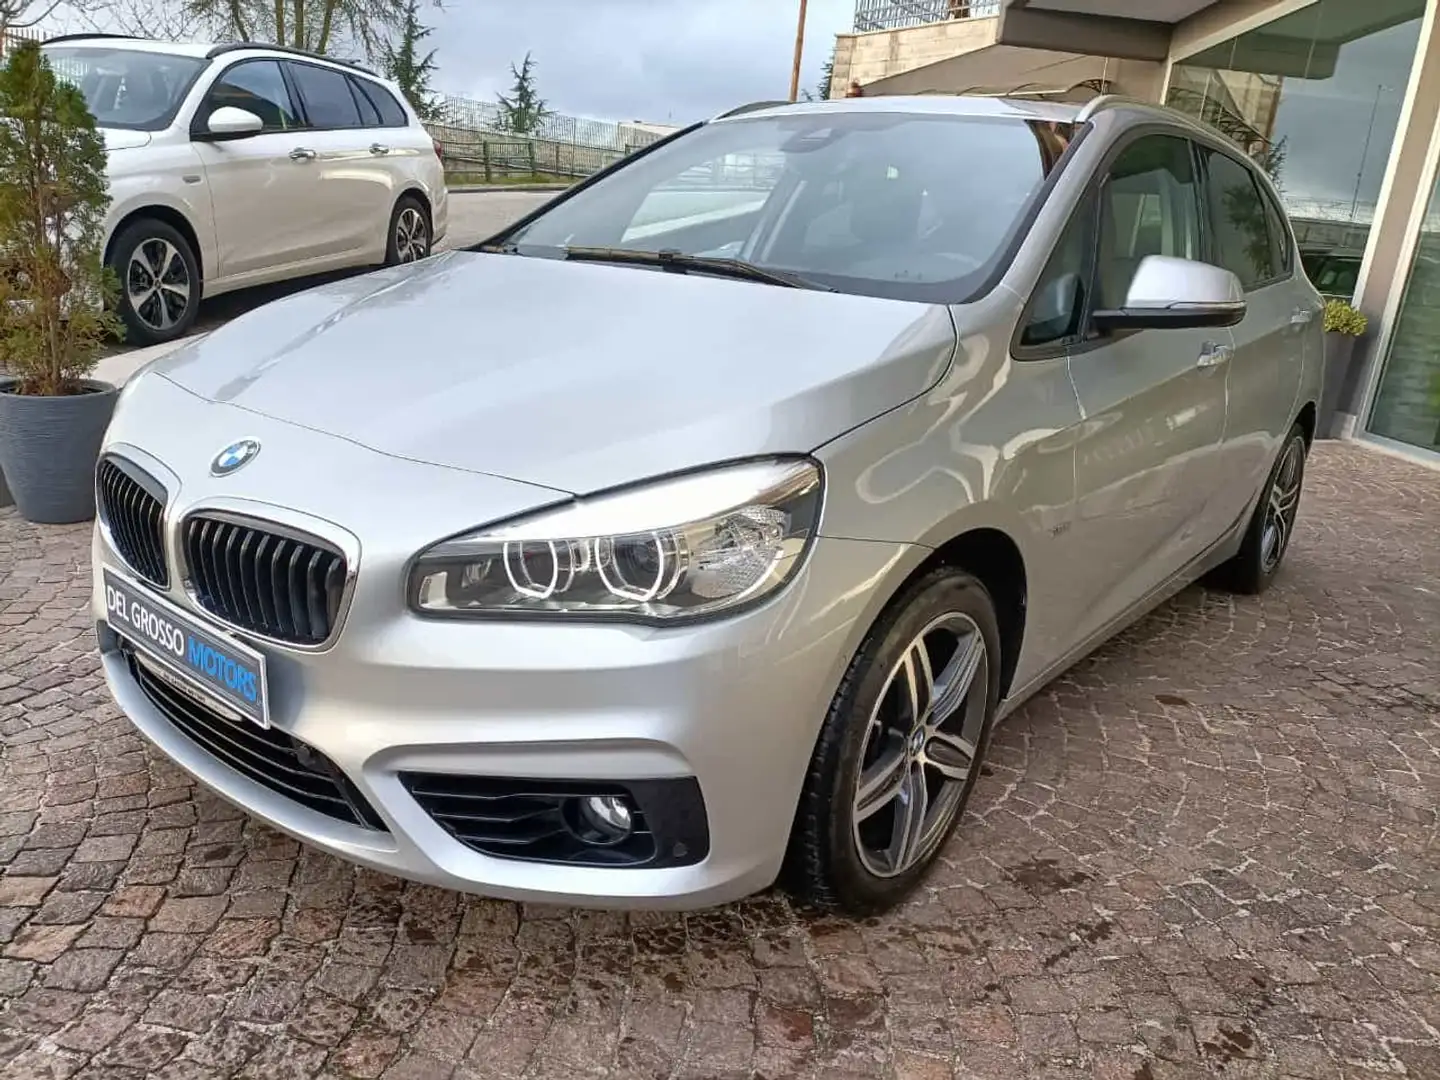 BMW 218 d xdrive-automatica-panorama-xeno Argent - 1